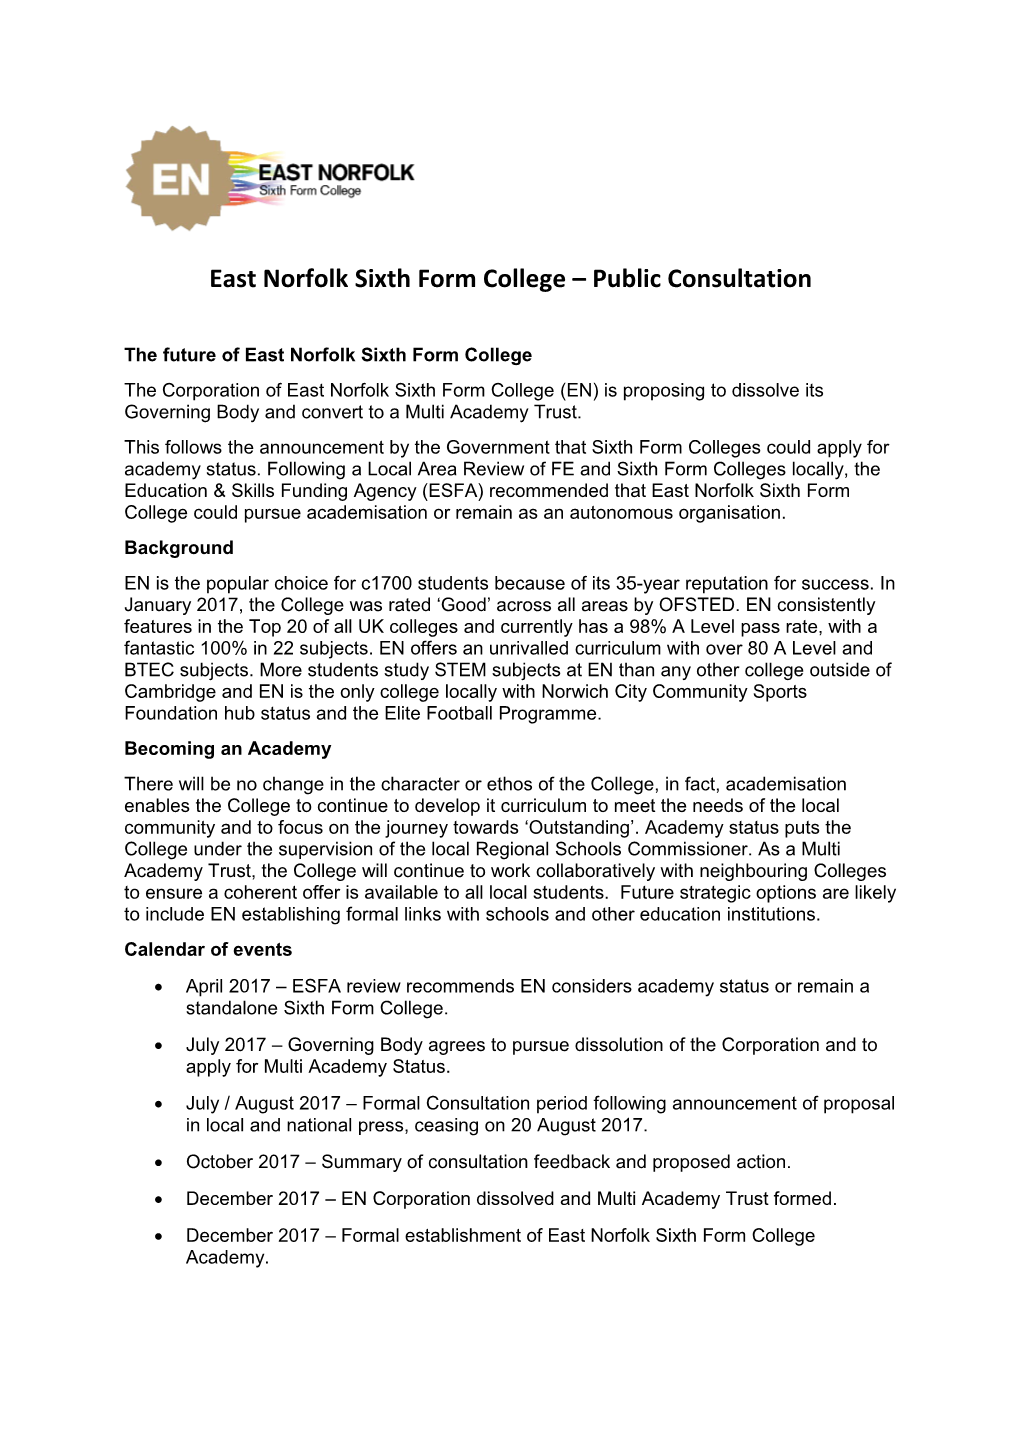 East Norfolk Sixth Form College Public Consultation